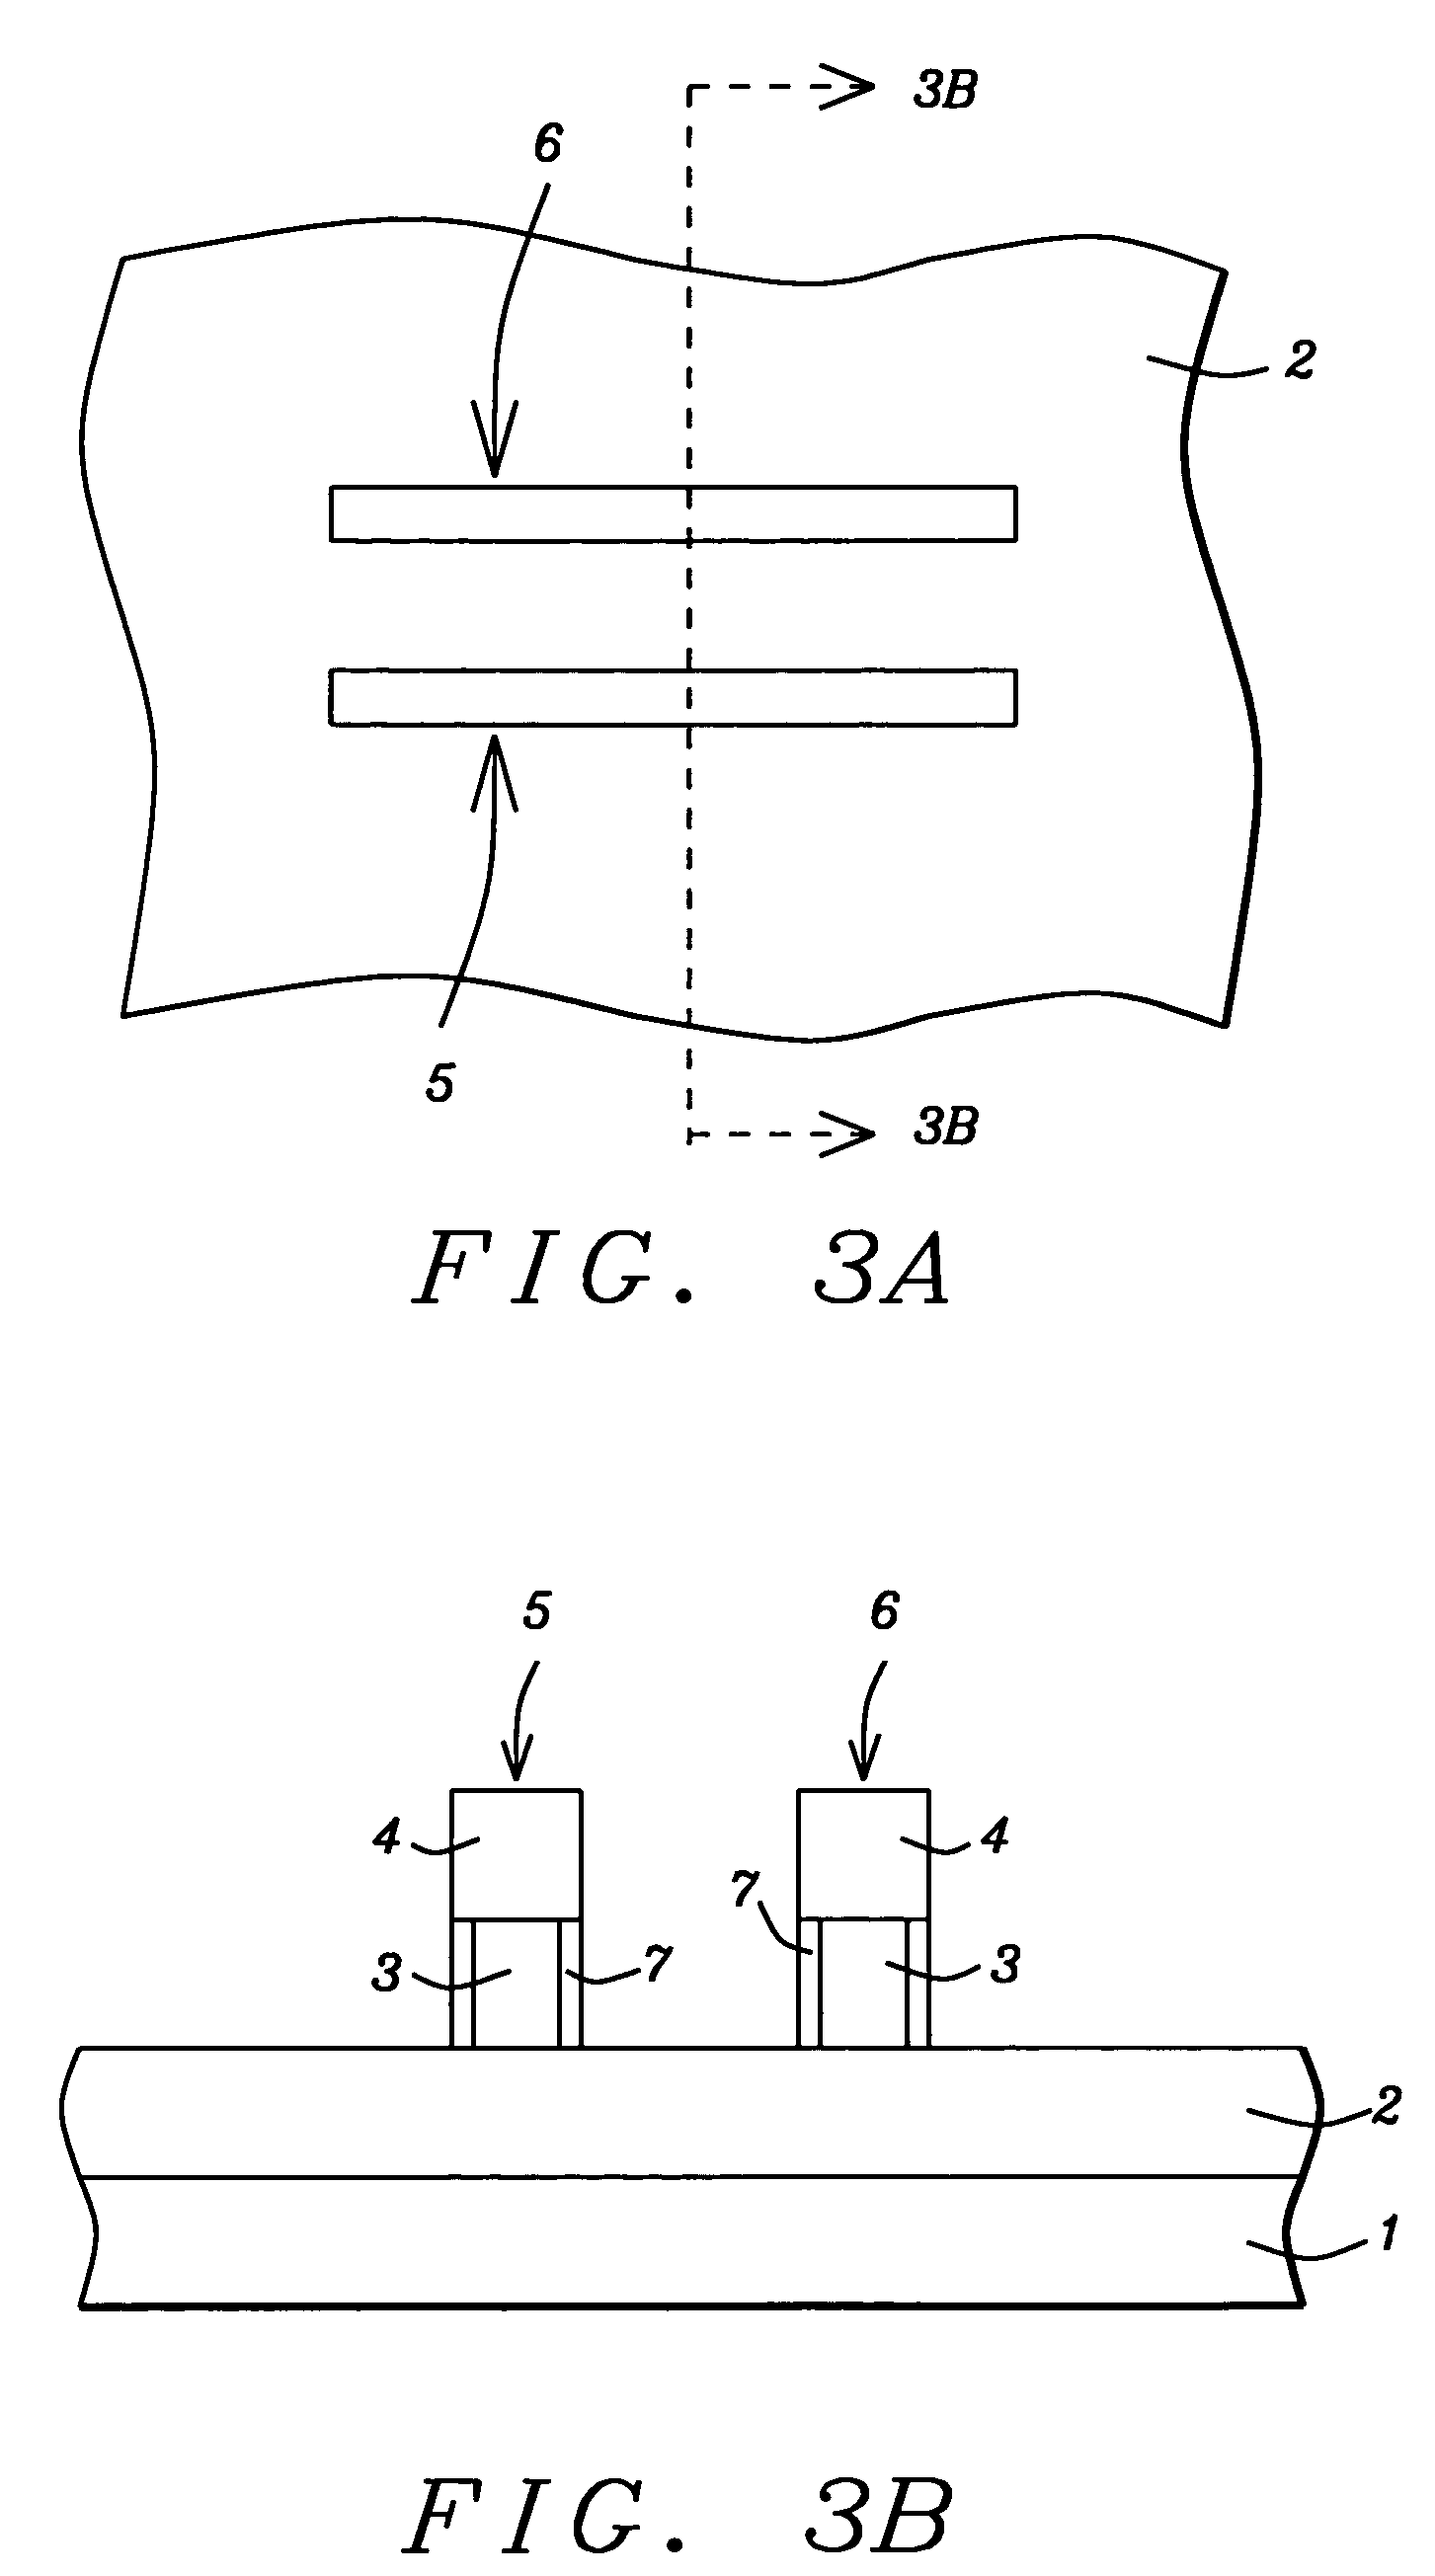 Method of forming an N channel and P channel finfet device on the same semiconductor substrate